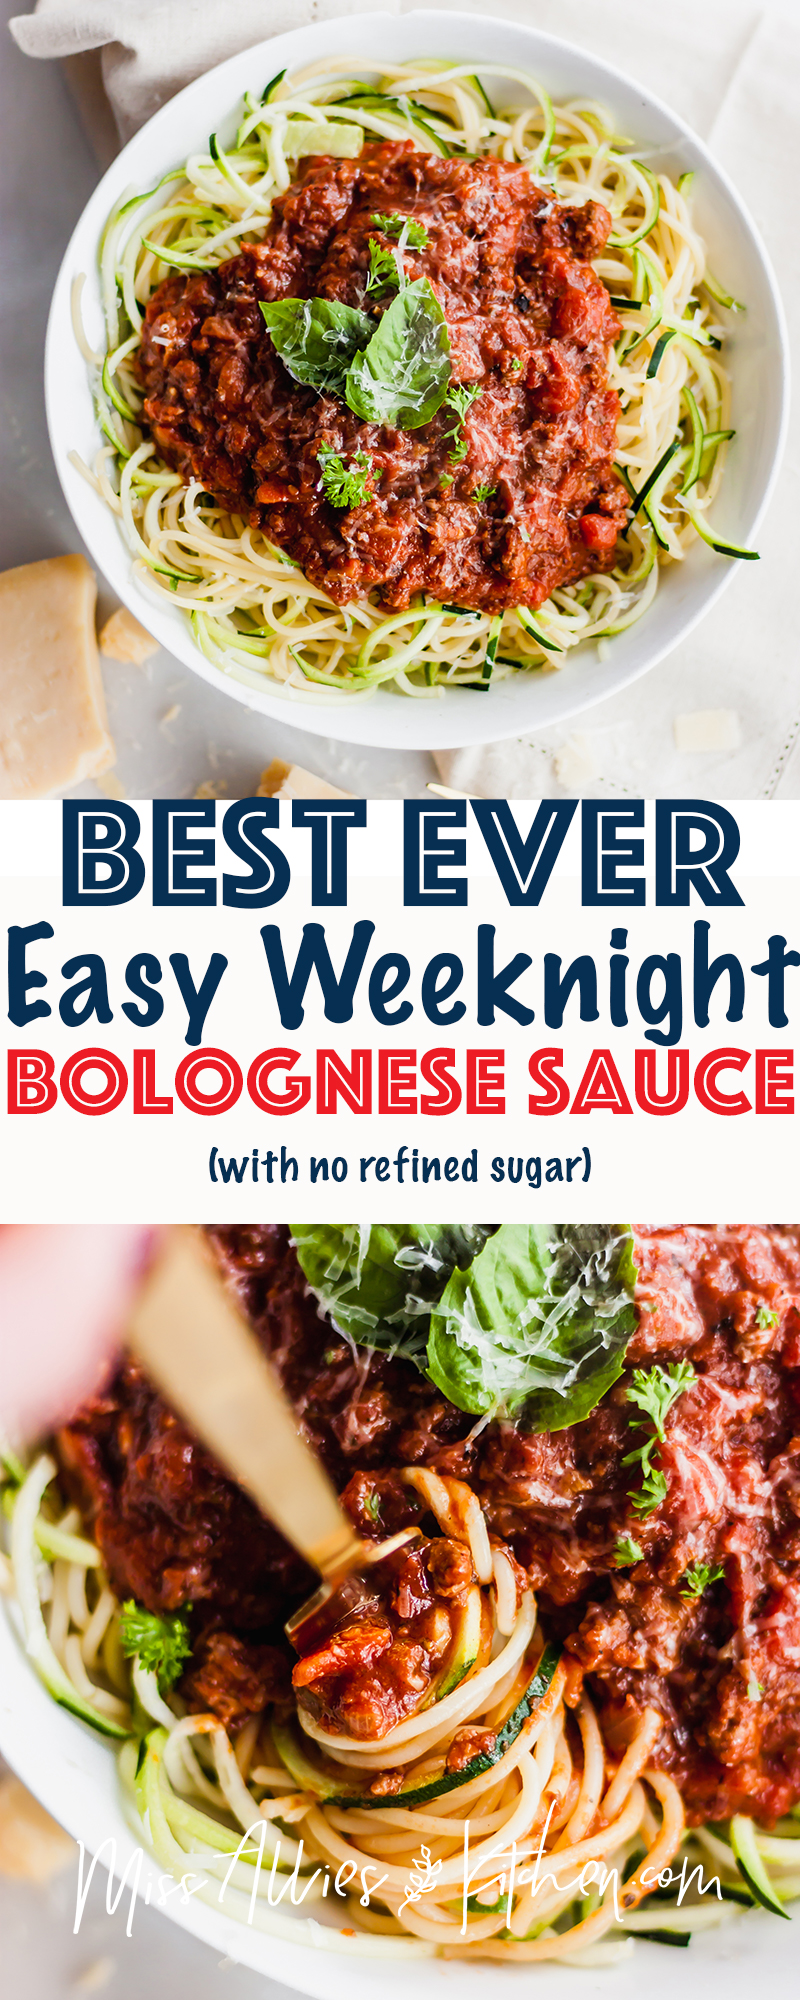 Best Ever Easy Weeknight Bolognese Sauce